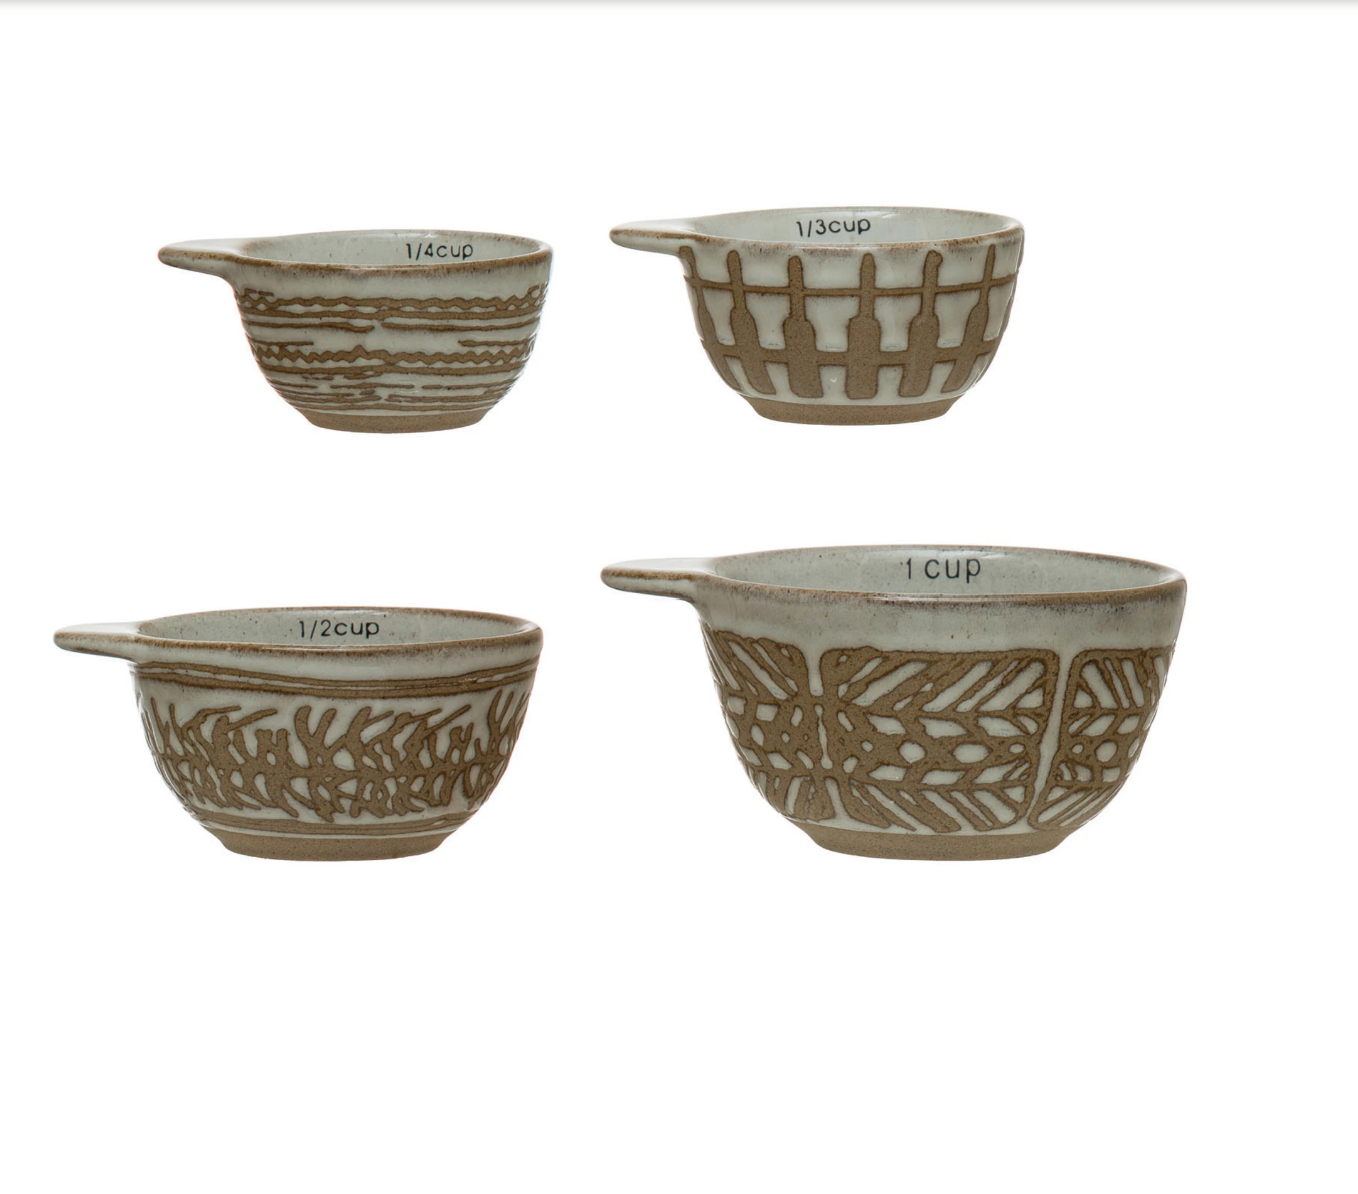 Measuring Cups with Wax Relief Pattern, Set of 4